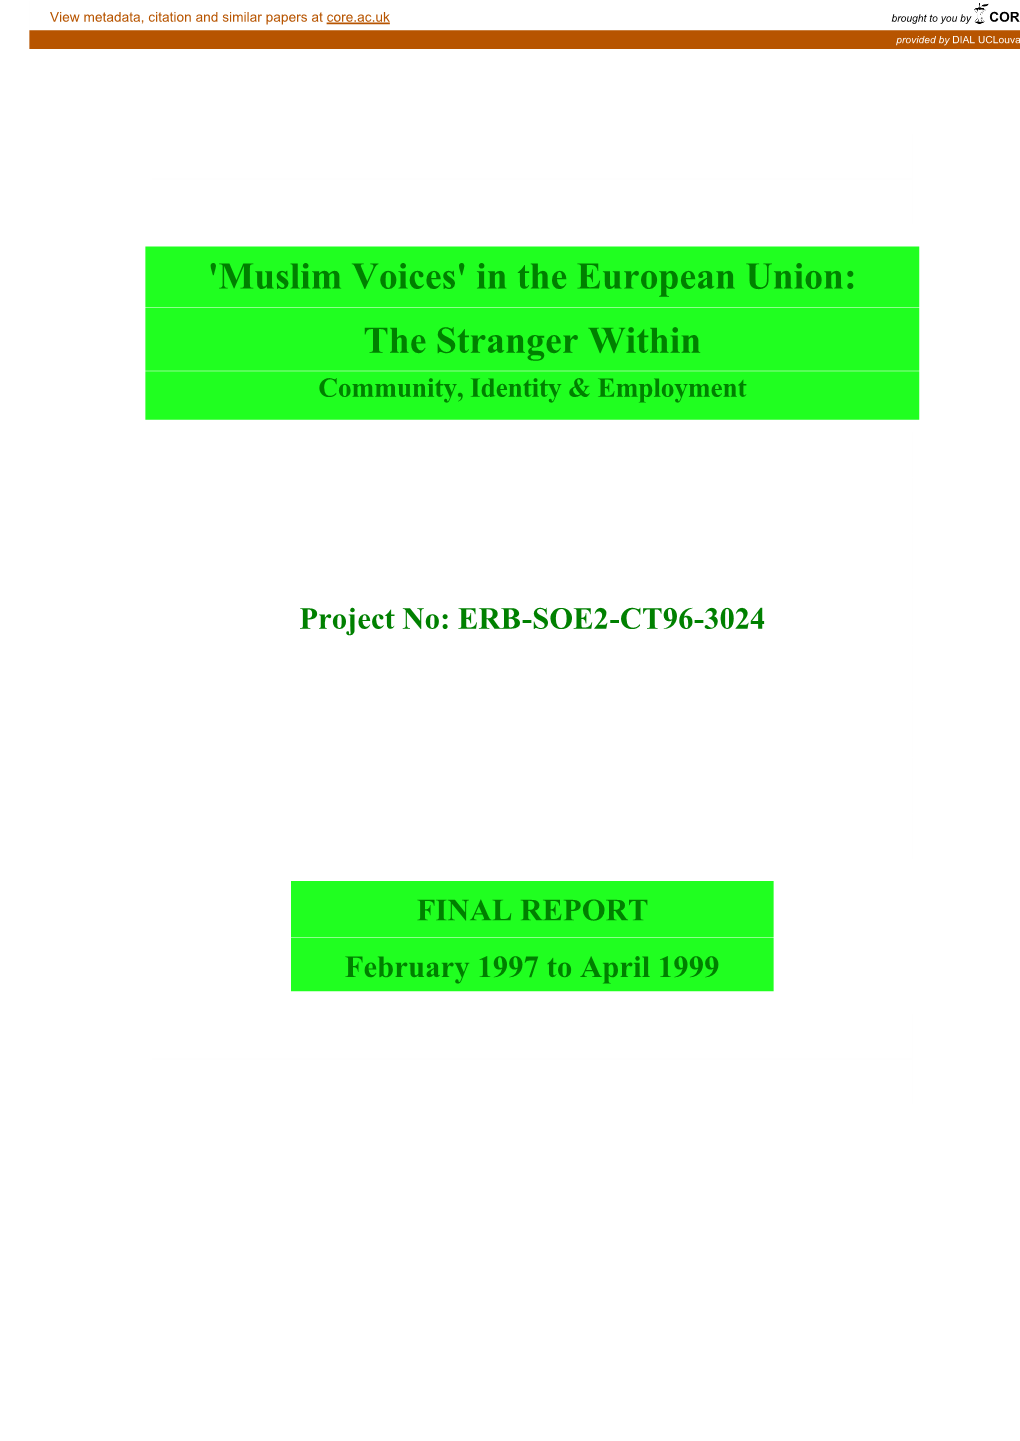 'Muslim Voices' in the European Union: the Stranger Within Community, Identity & Employment